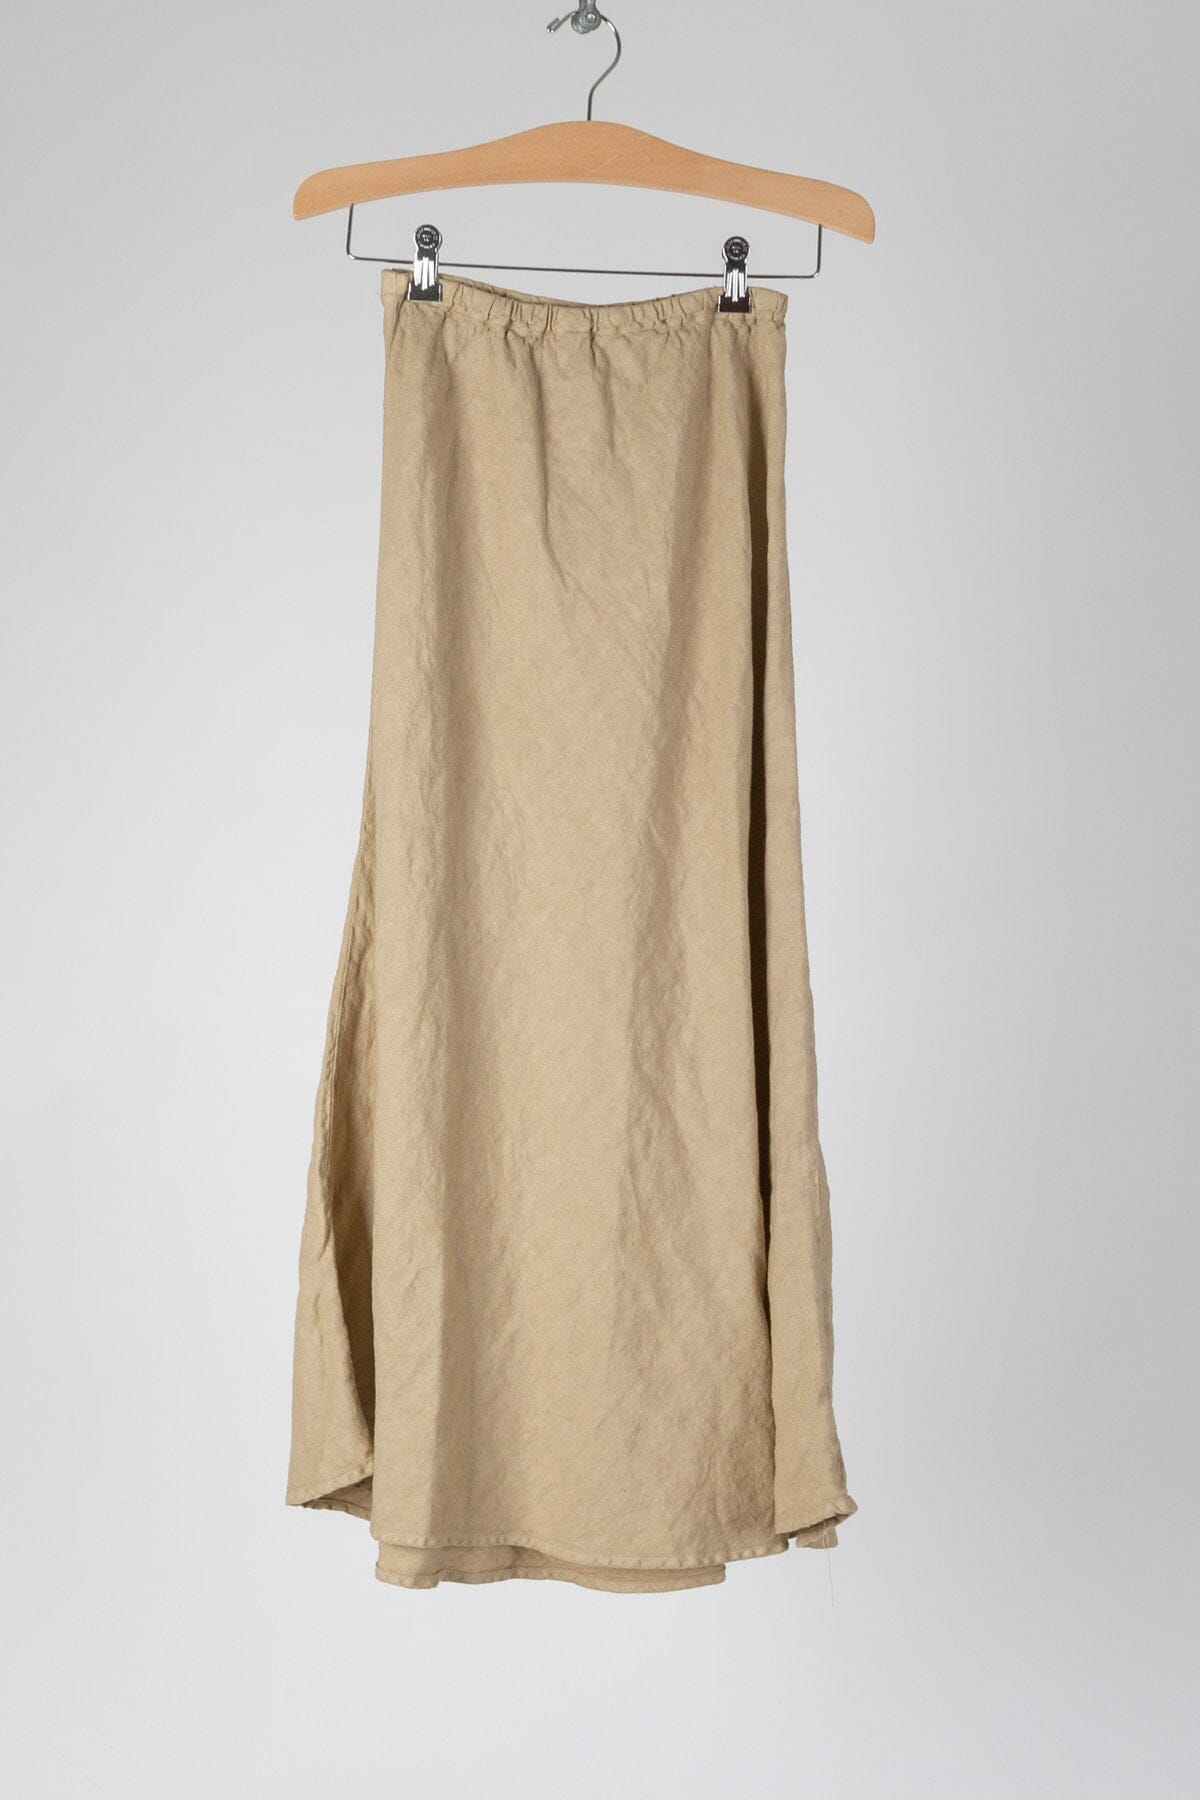 Tanya - Linen Twill S21 - 893 Bottoms CP Shades toast 893